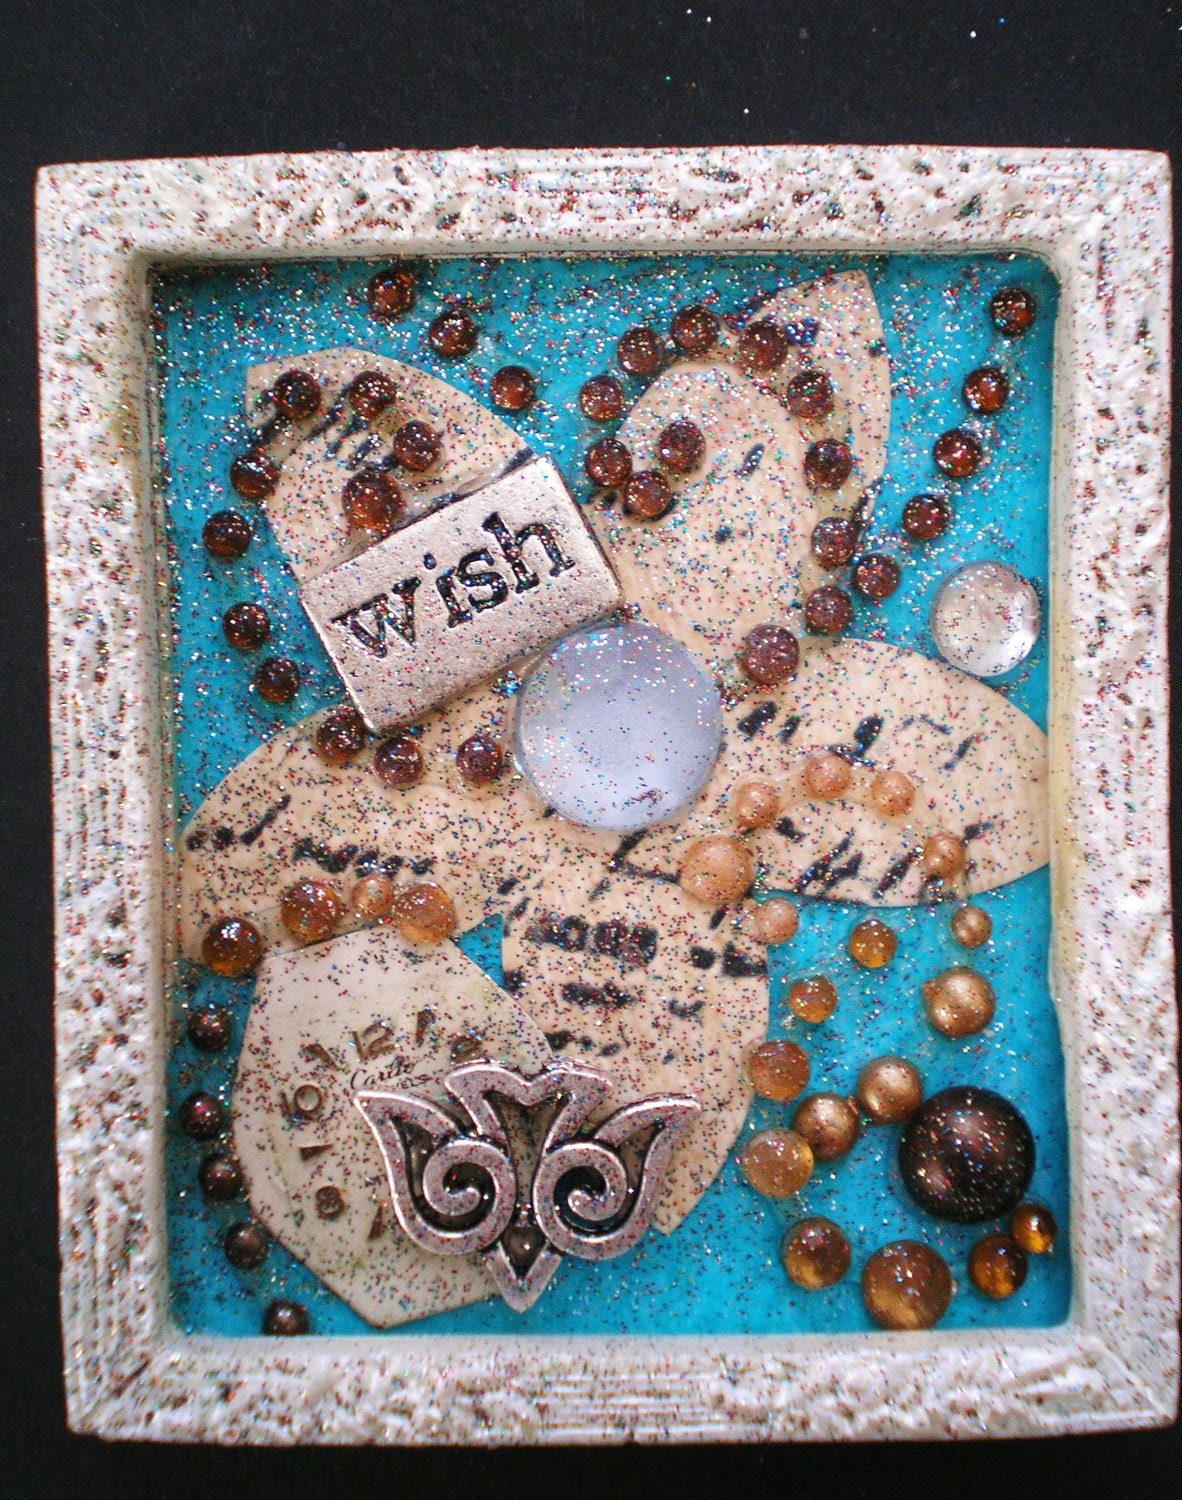 WISH  - Tiny Collage Mixed Media OOAK Framed Signed with Beads Silver Bird Charm Watch Parts